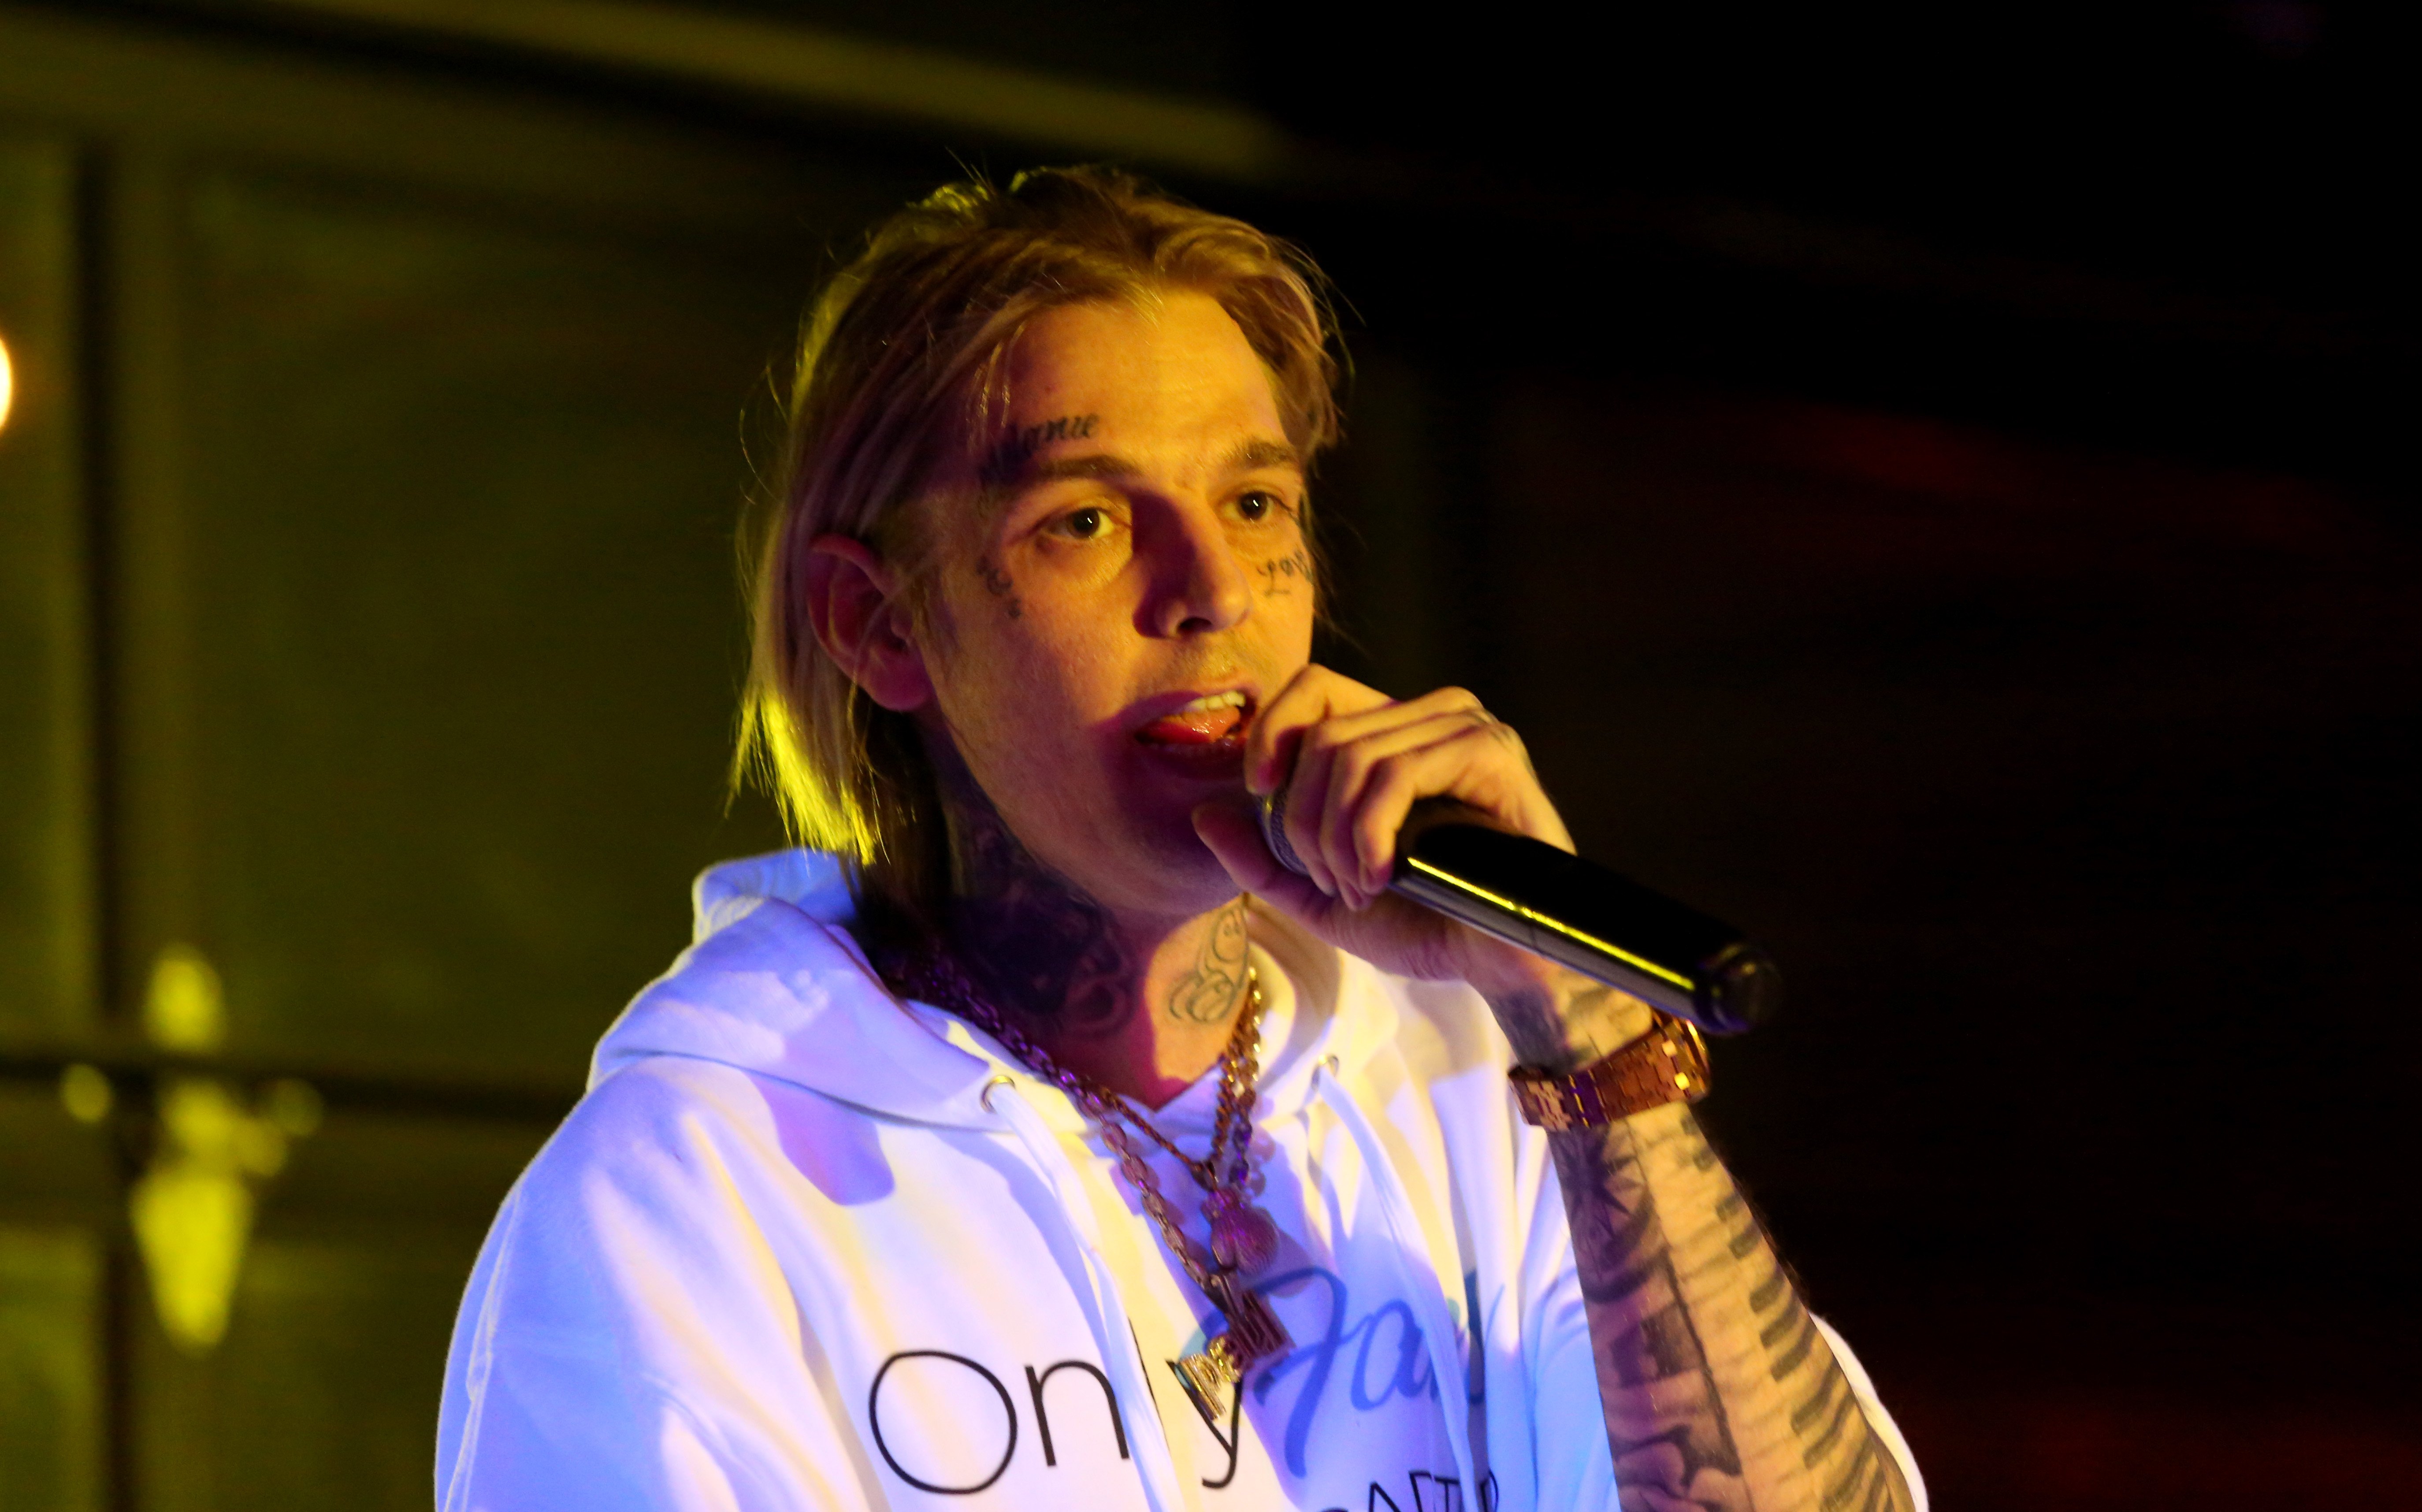 Aaron Carter performs at the "Kings of Hustler" male revue on February 12, 2022, in Las Vegas, Nevada | Source: Getty Images